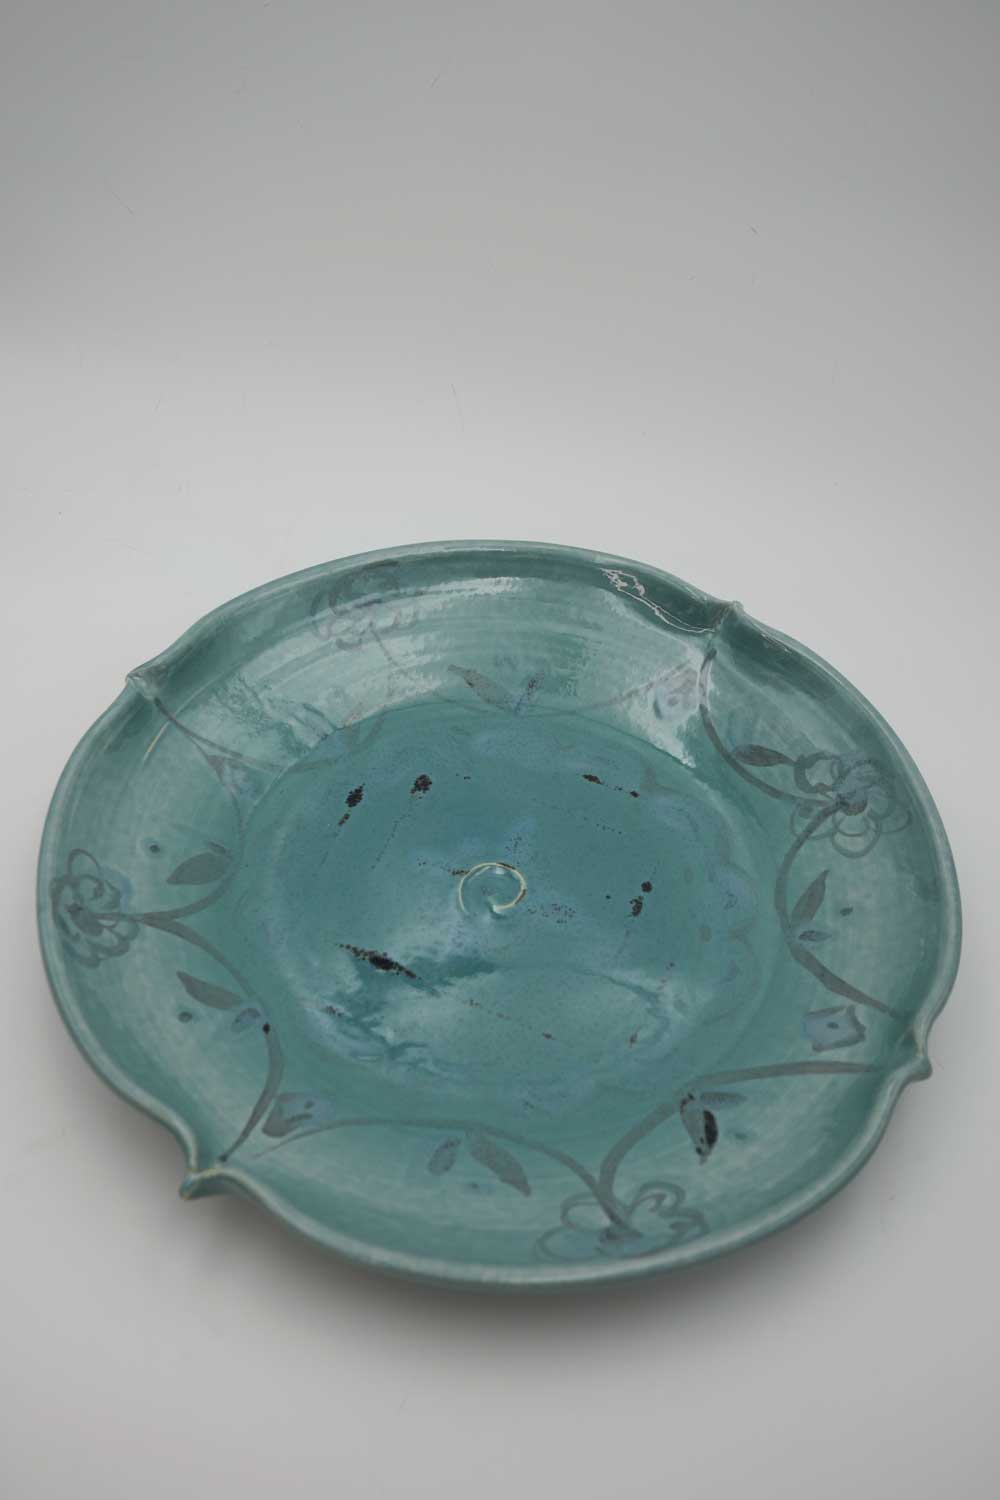 A  handmade ceramic wide and shallow turquoise bowl with fluted edges. Decorated with painted grey floral design. 